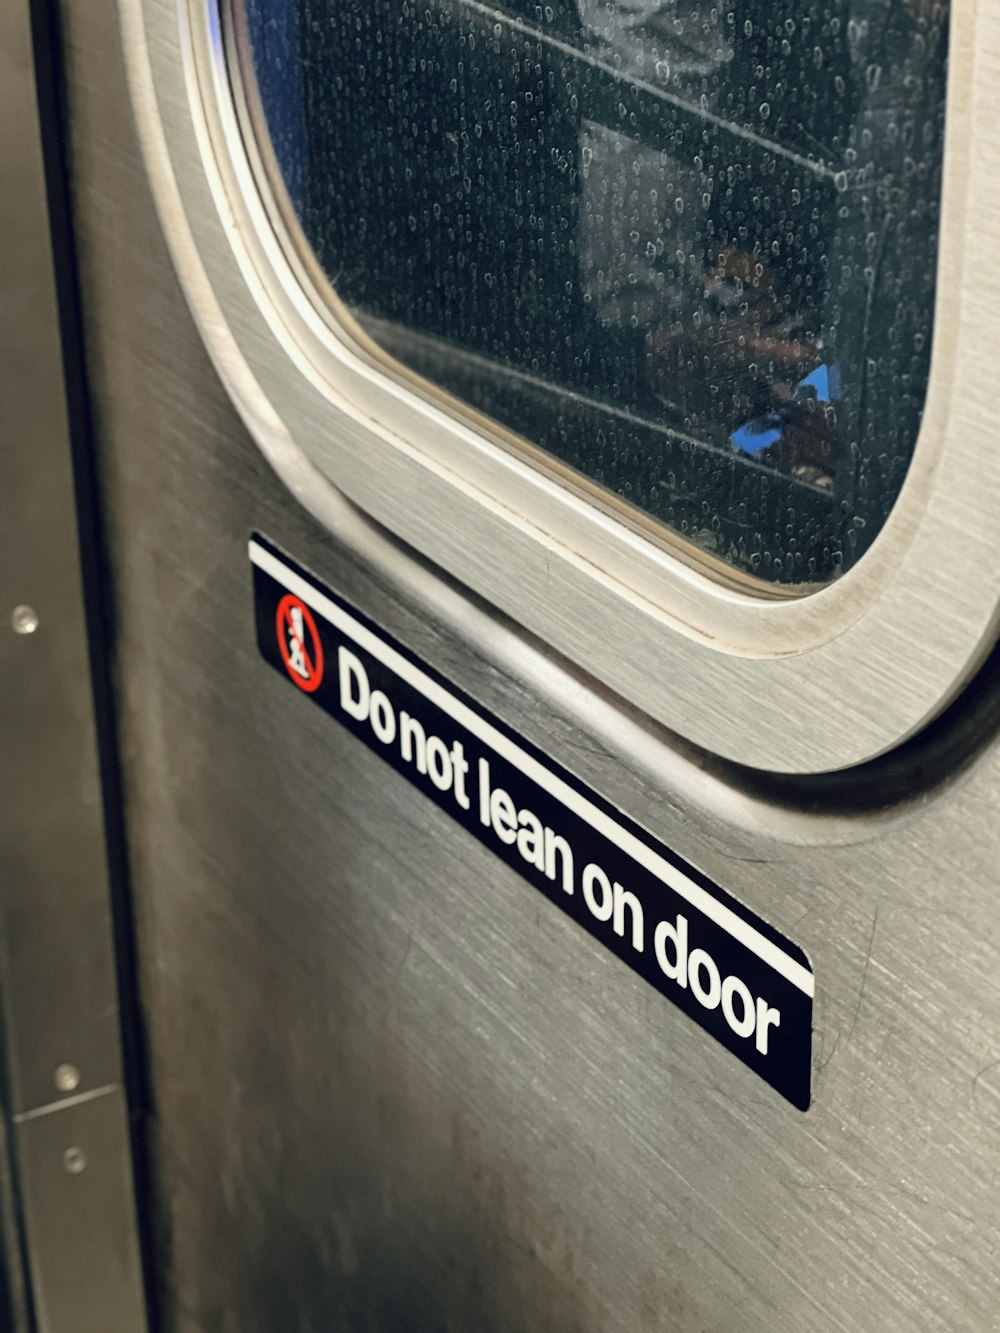 a door with a sticker that says don't lean on door